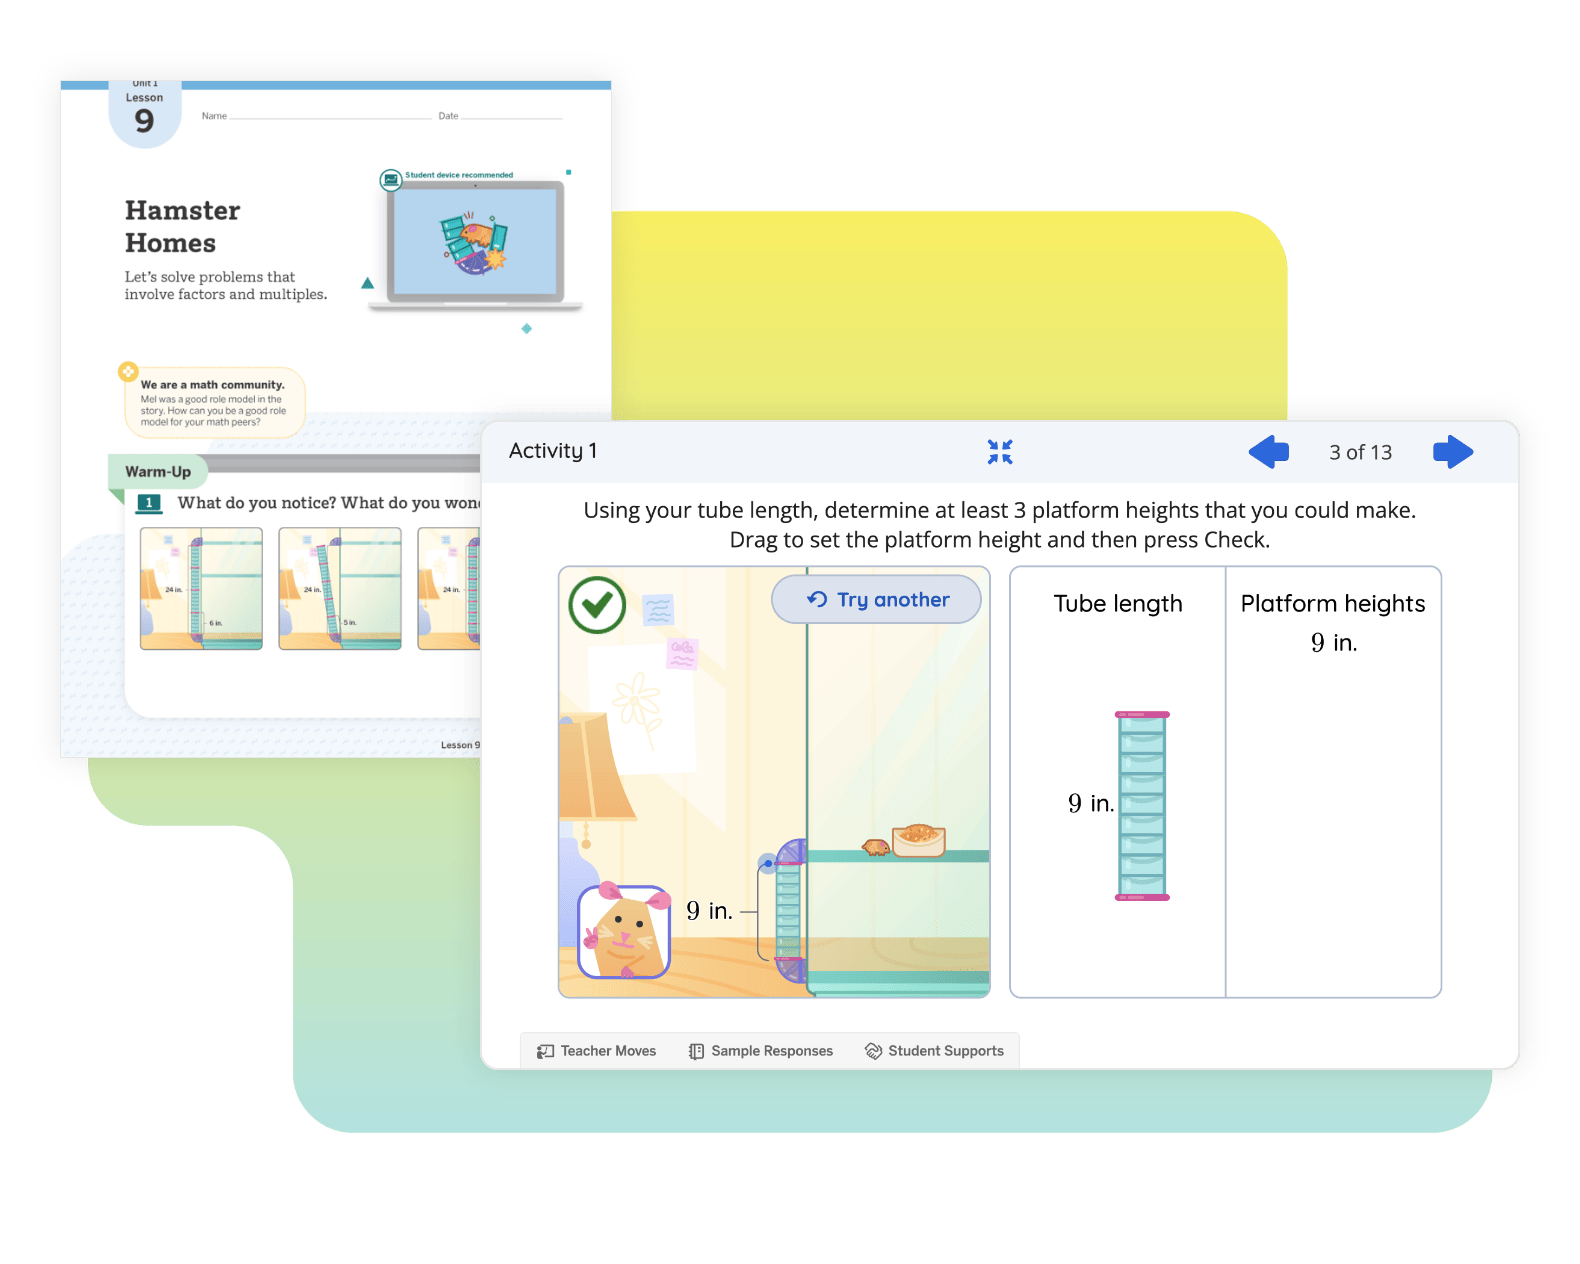 Educational software interface featuring a New York math problem about measuring platform heights using a 9-inch tube, illustrated with a playful, colorful design.